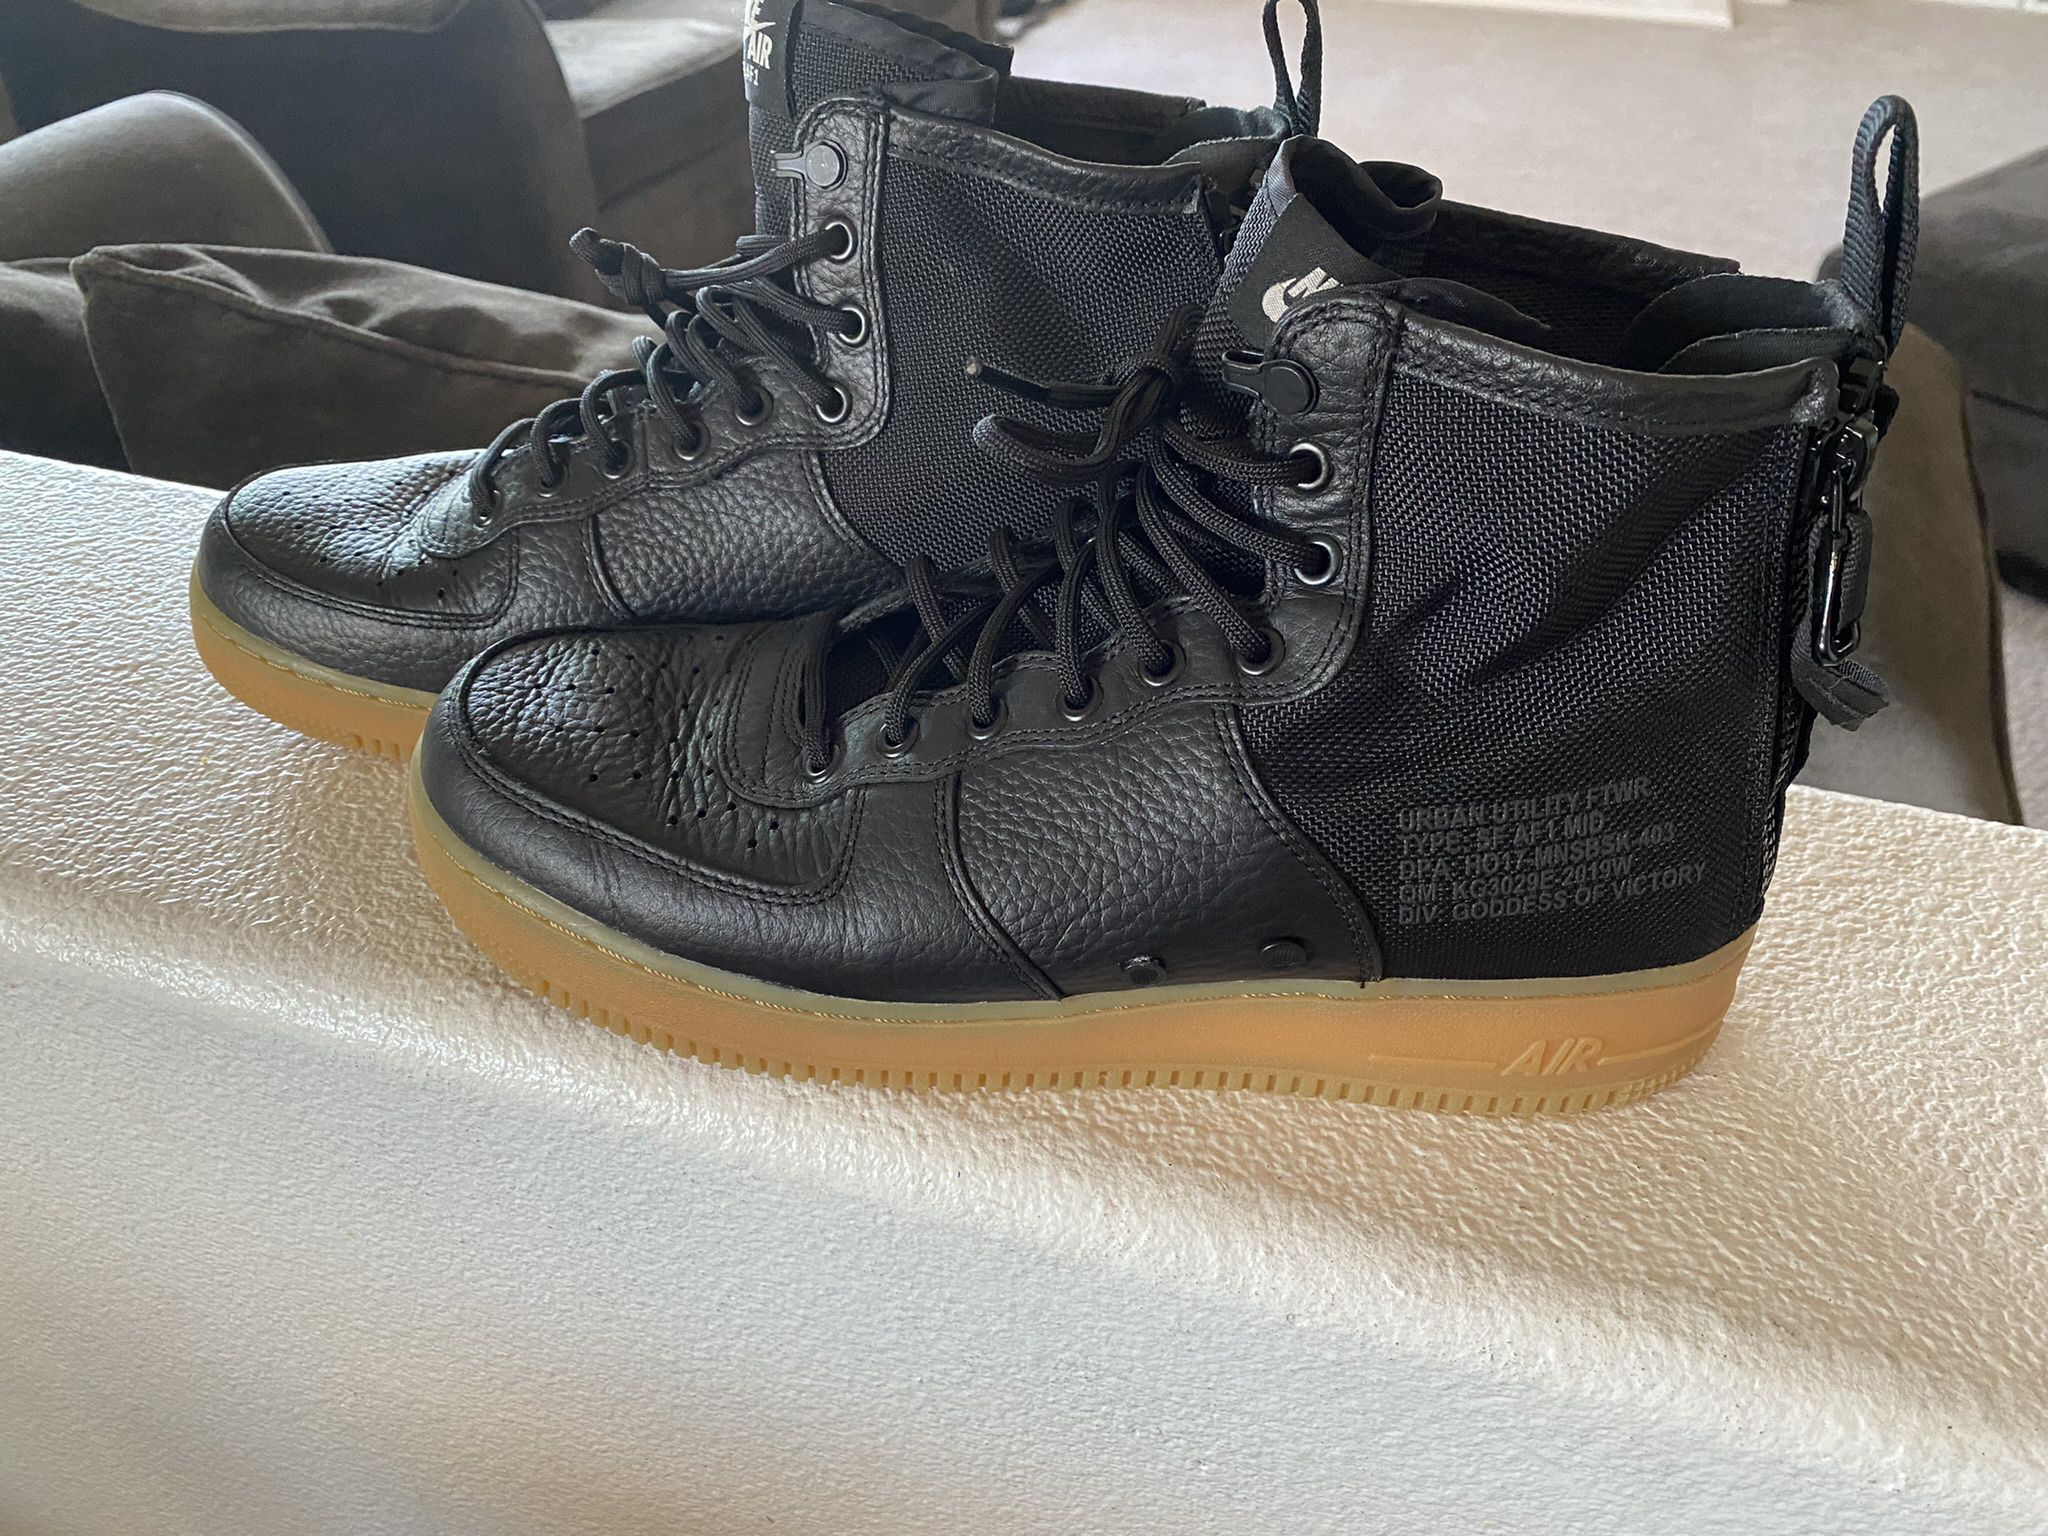 Nike SF Air 1 Mid Black Gum Size 10.5 for Sale in Winchester, CA - OfferUp